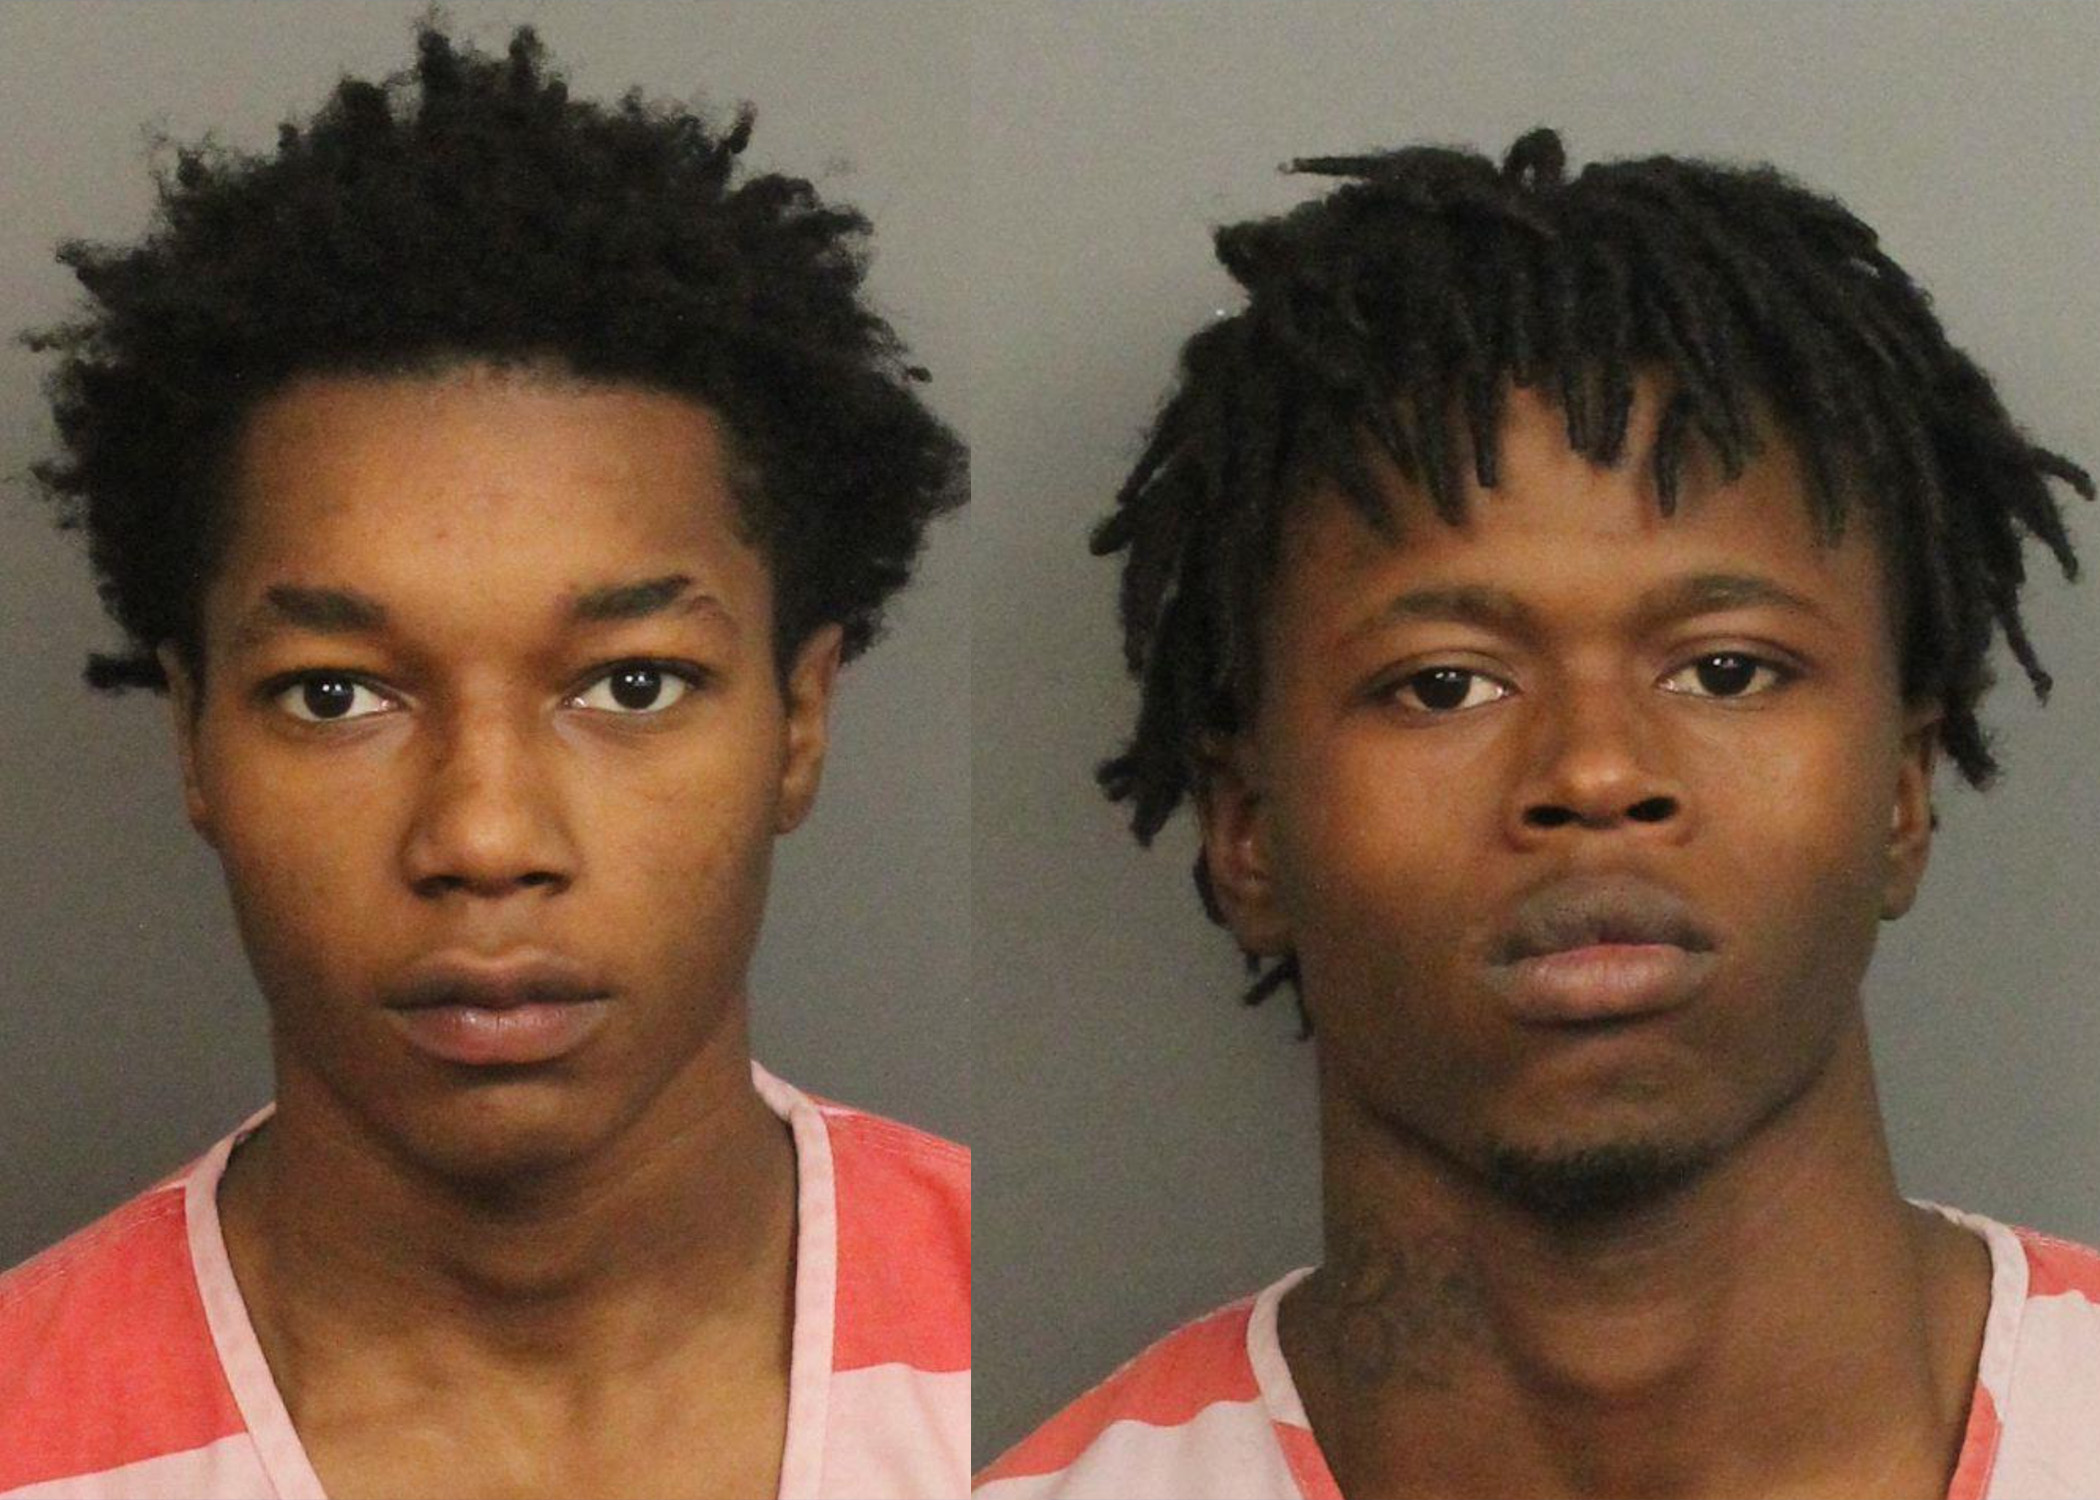 UPDATE: 2 arrested for murder of sleeping 12-year-old in drive-by shooting